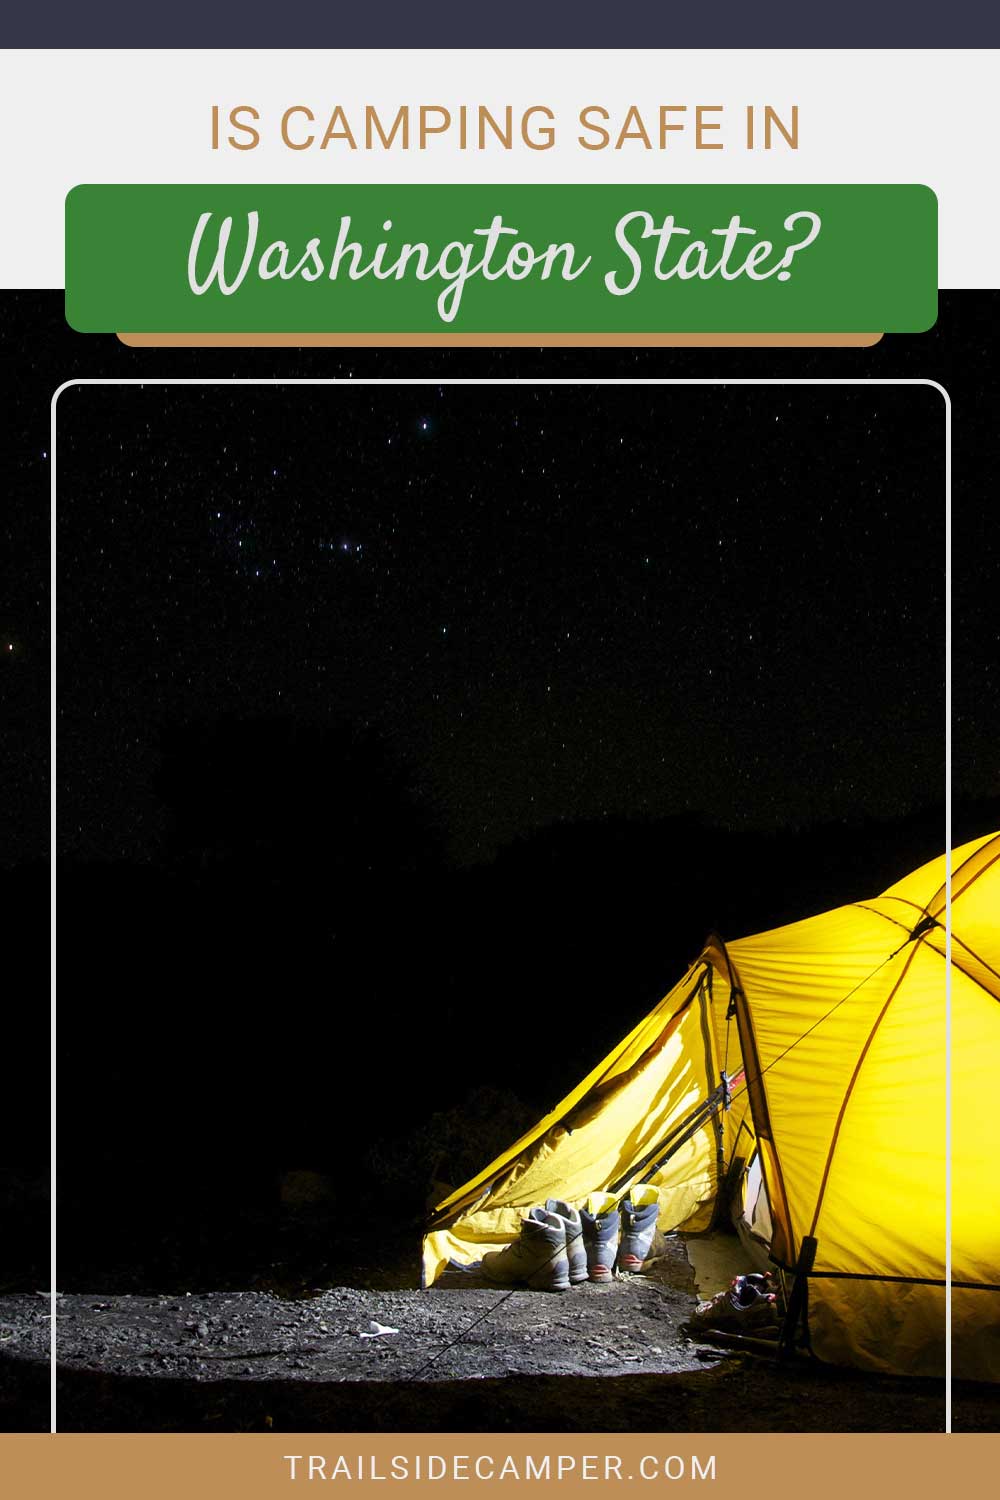 Is Camping Safe in Washington State?